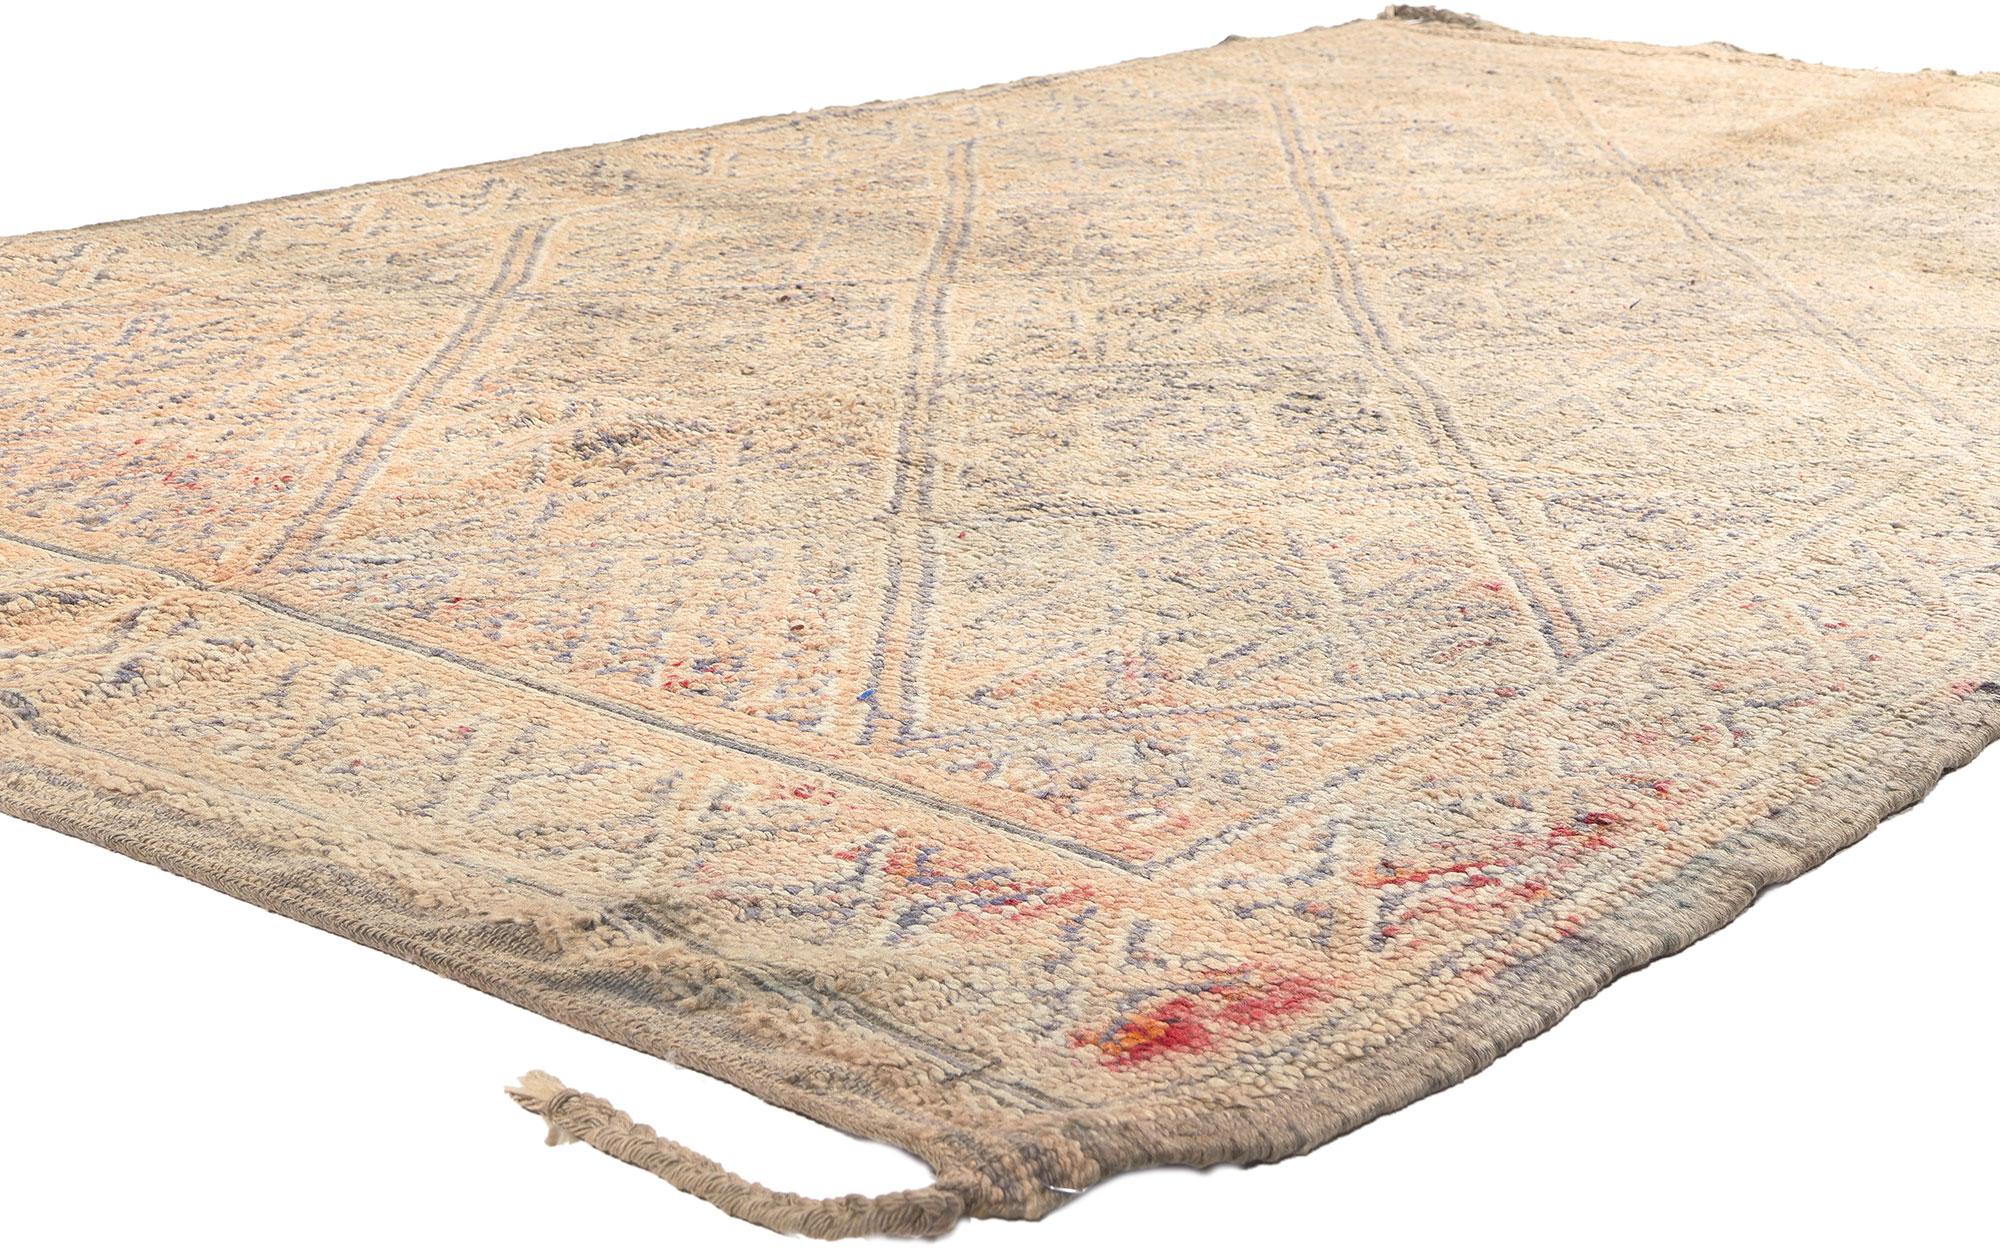 20973 Vintage Beni MGuild Moroccan Rug, 06'03 x 11'03.
Woven with the enchanting expertise of Berber women from the Ait M'Guild tribe in the mystical Atlas Mountains of Morocco, Beni Mguild rugs are revered for their masterful craftsmanship and